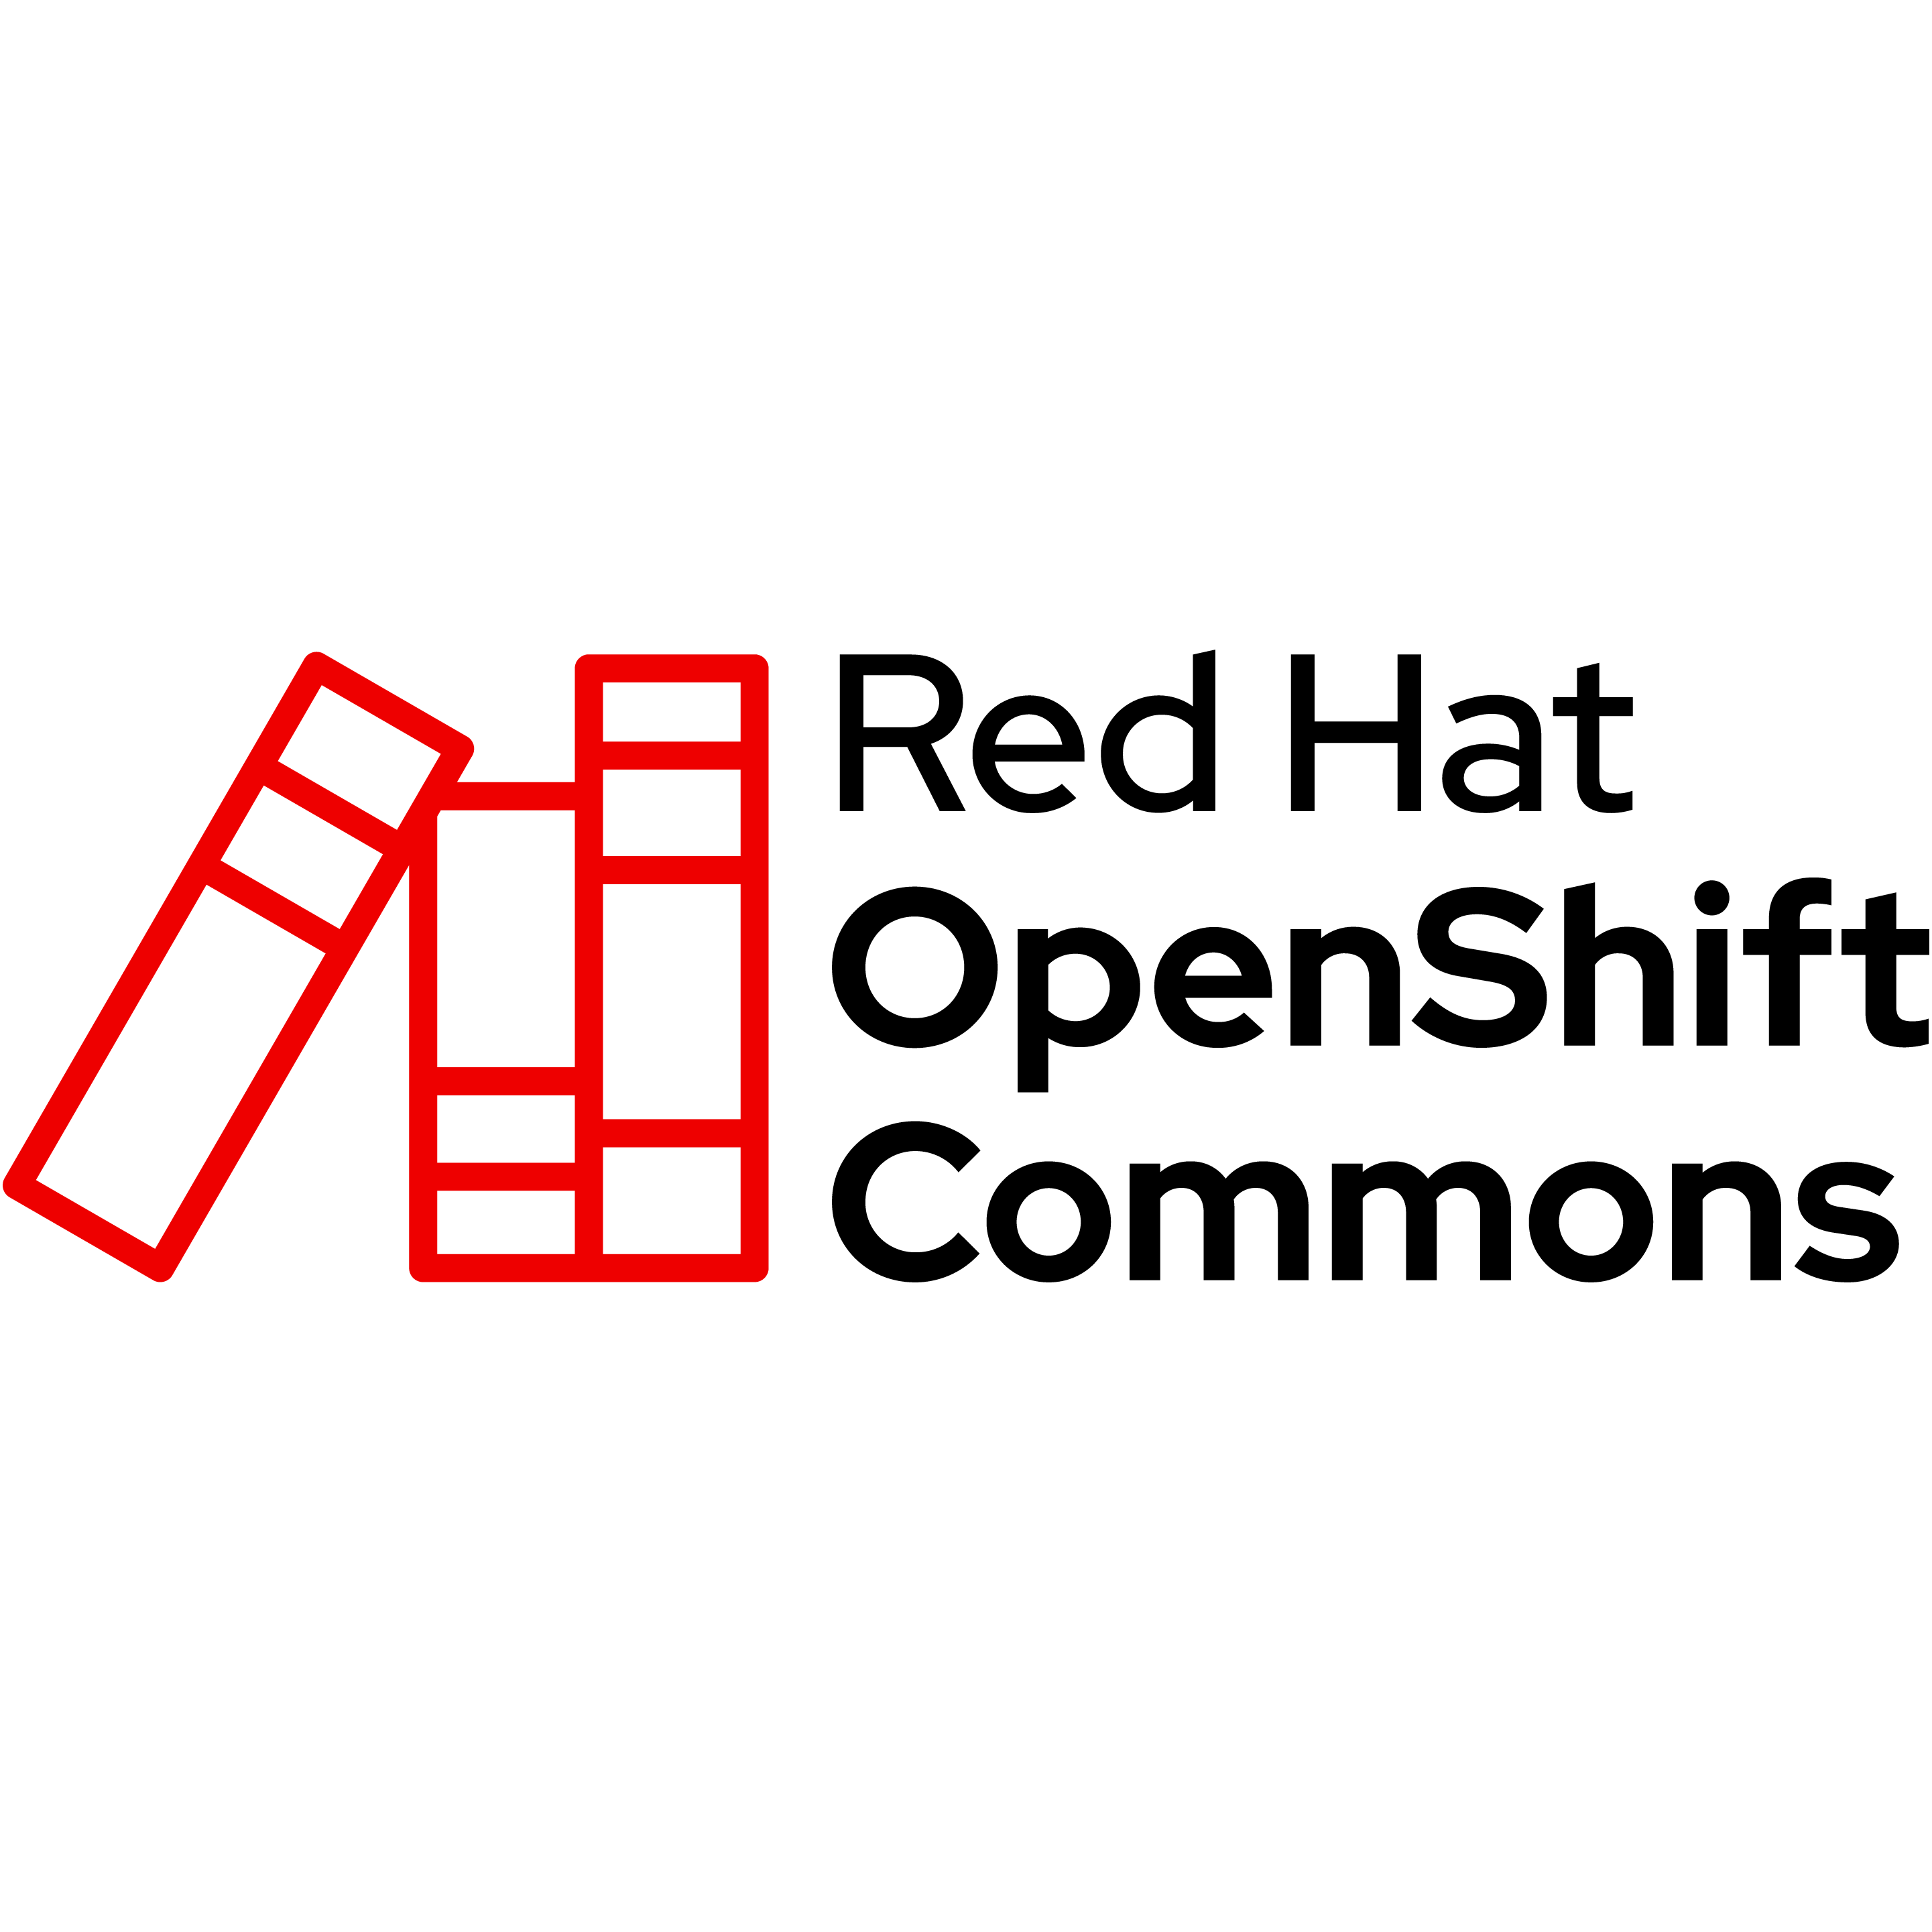 OpenShift Commons Gathering Co-Located with KubeCon + CloudNativeCon